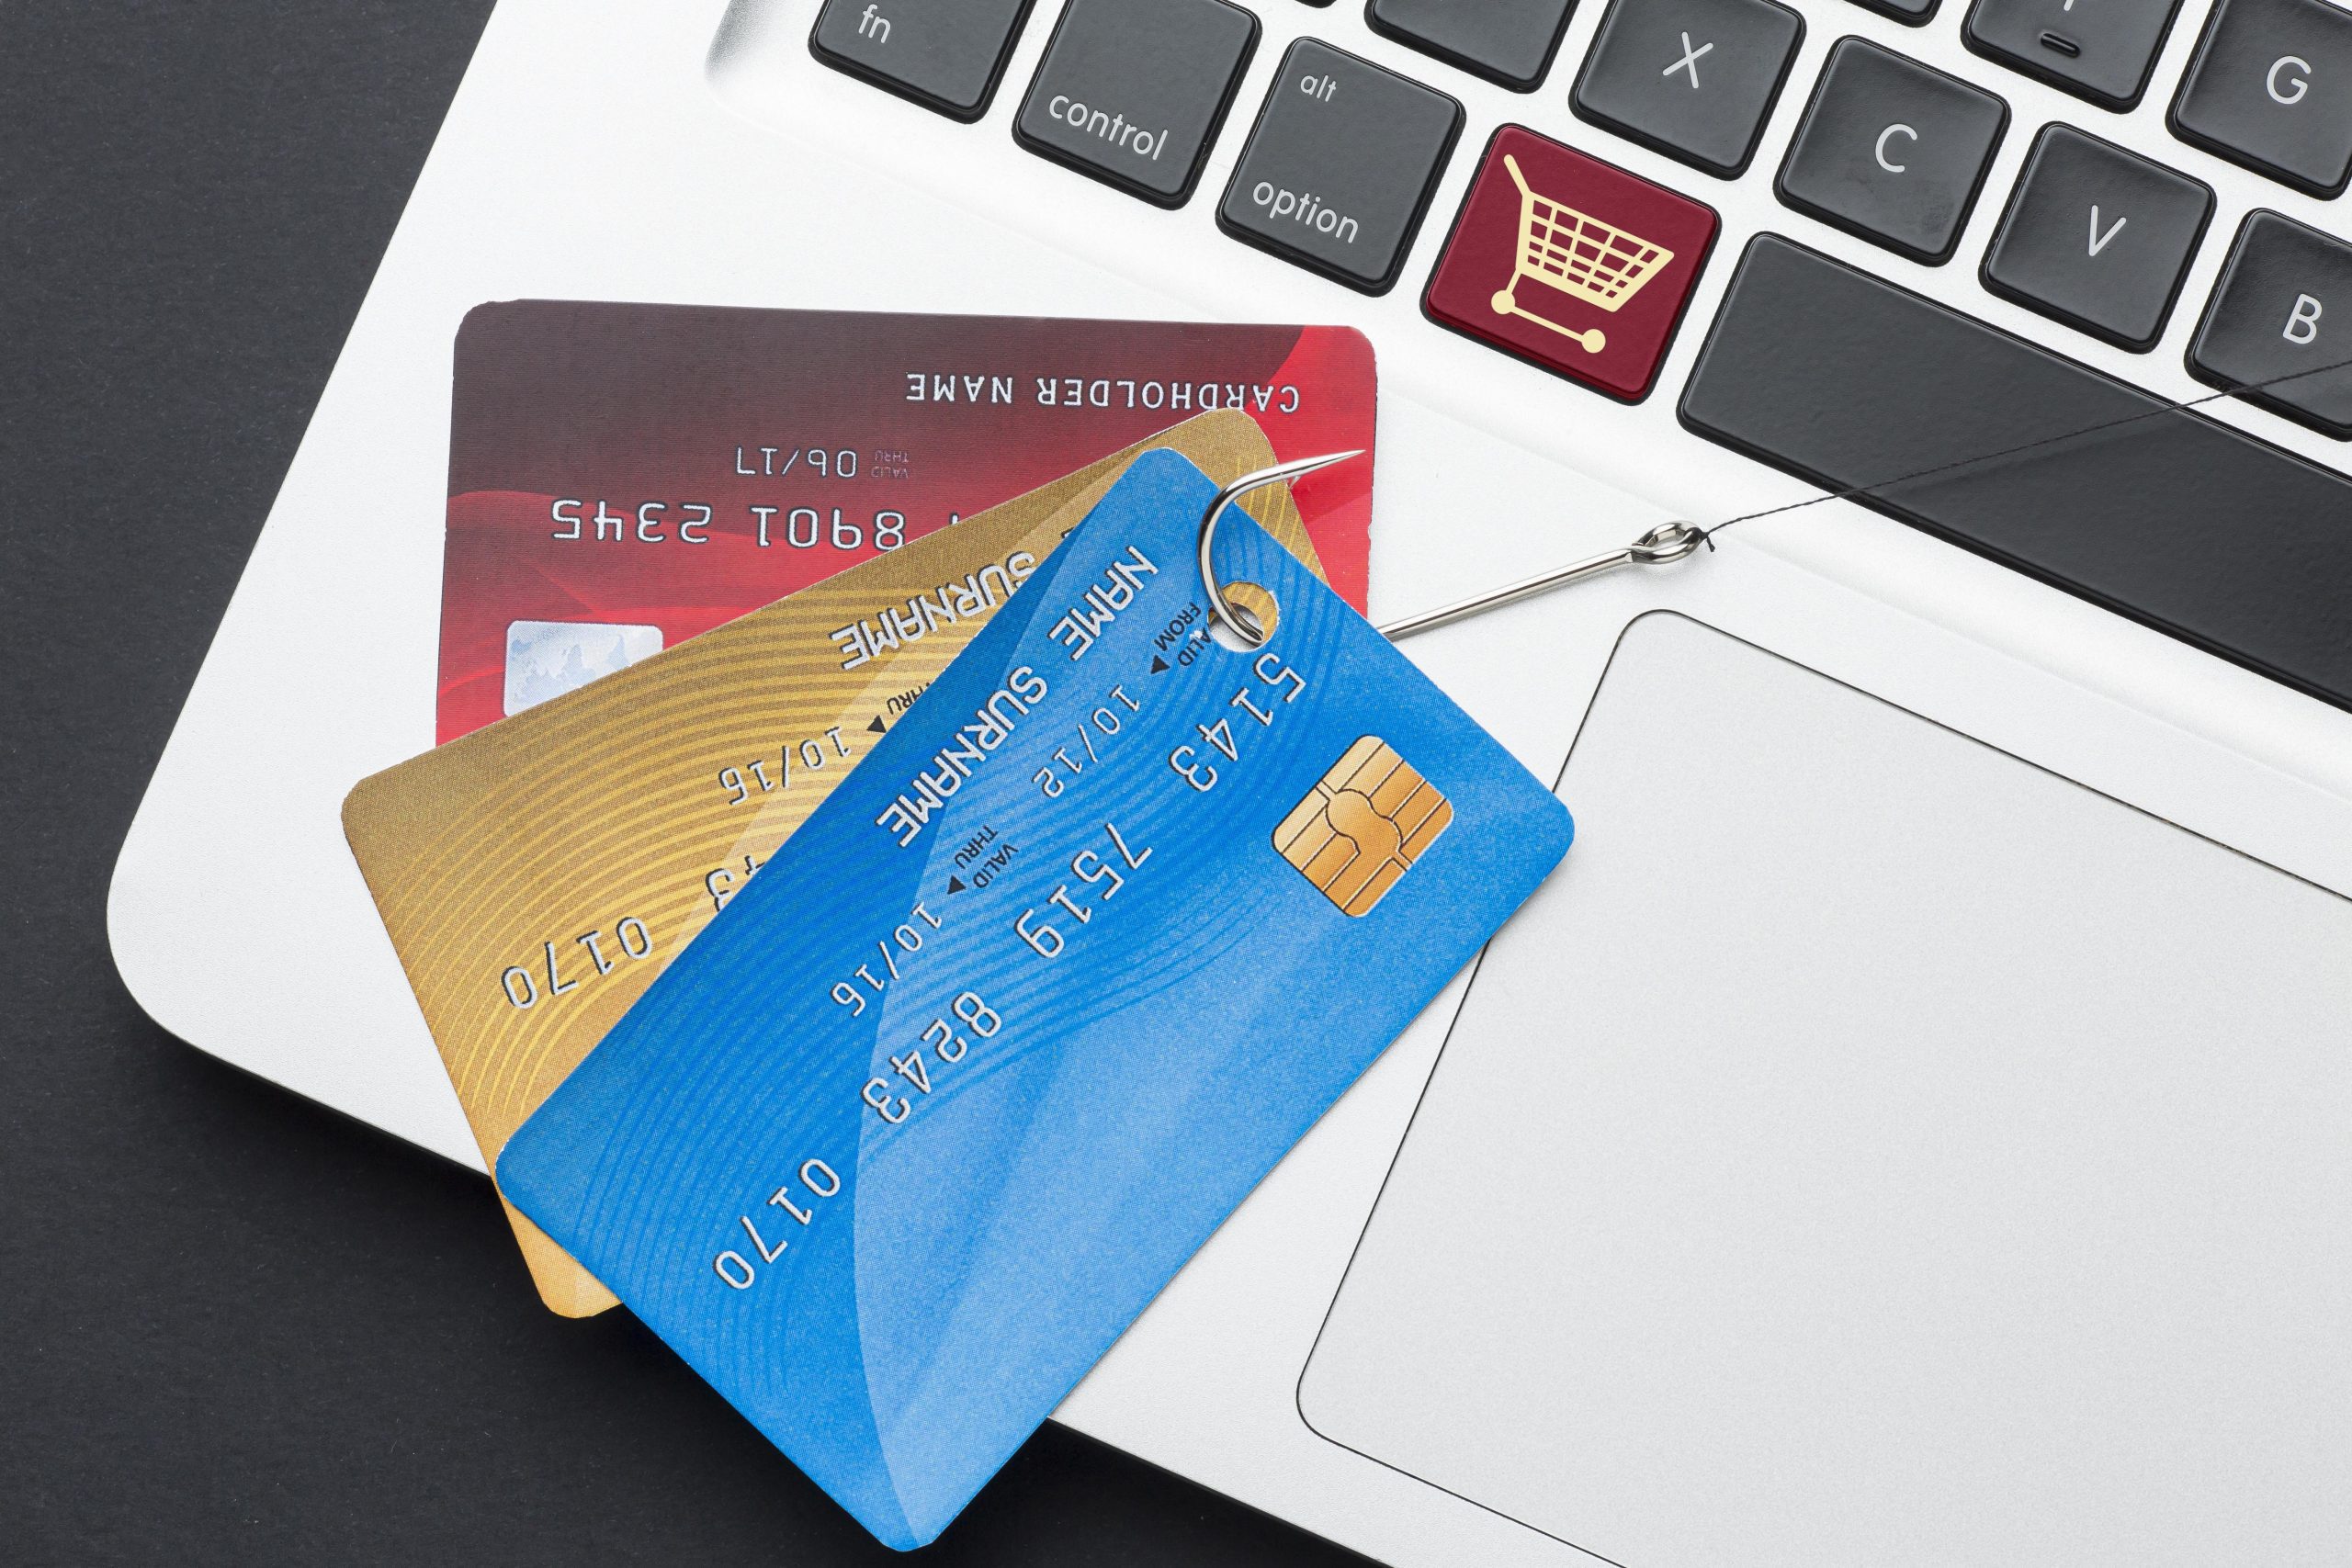 Is It Safe To Use A Debit Card Online? (Answered + Details)